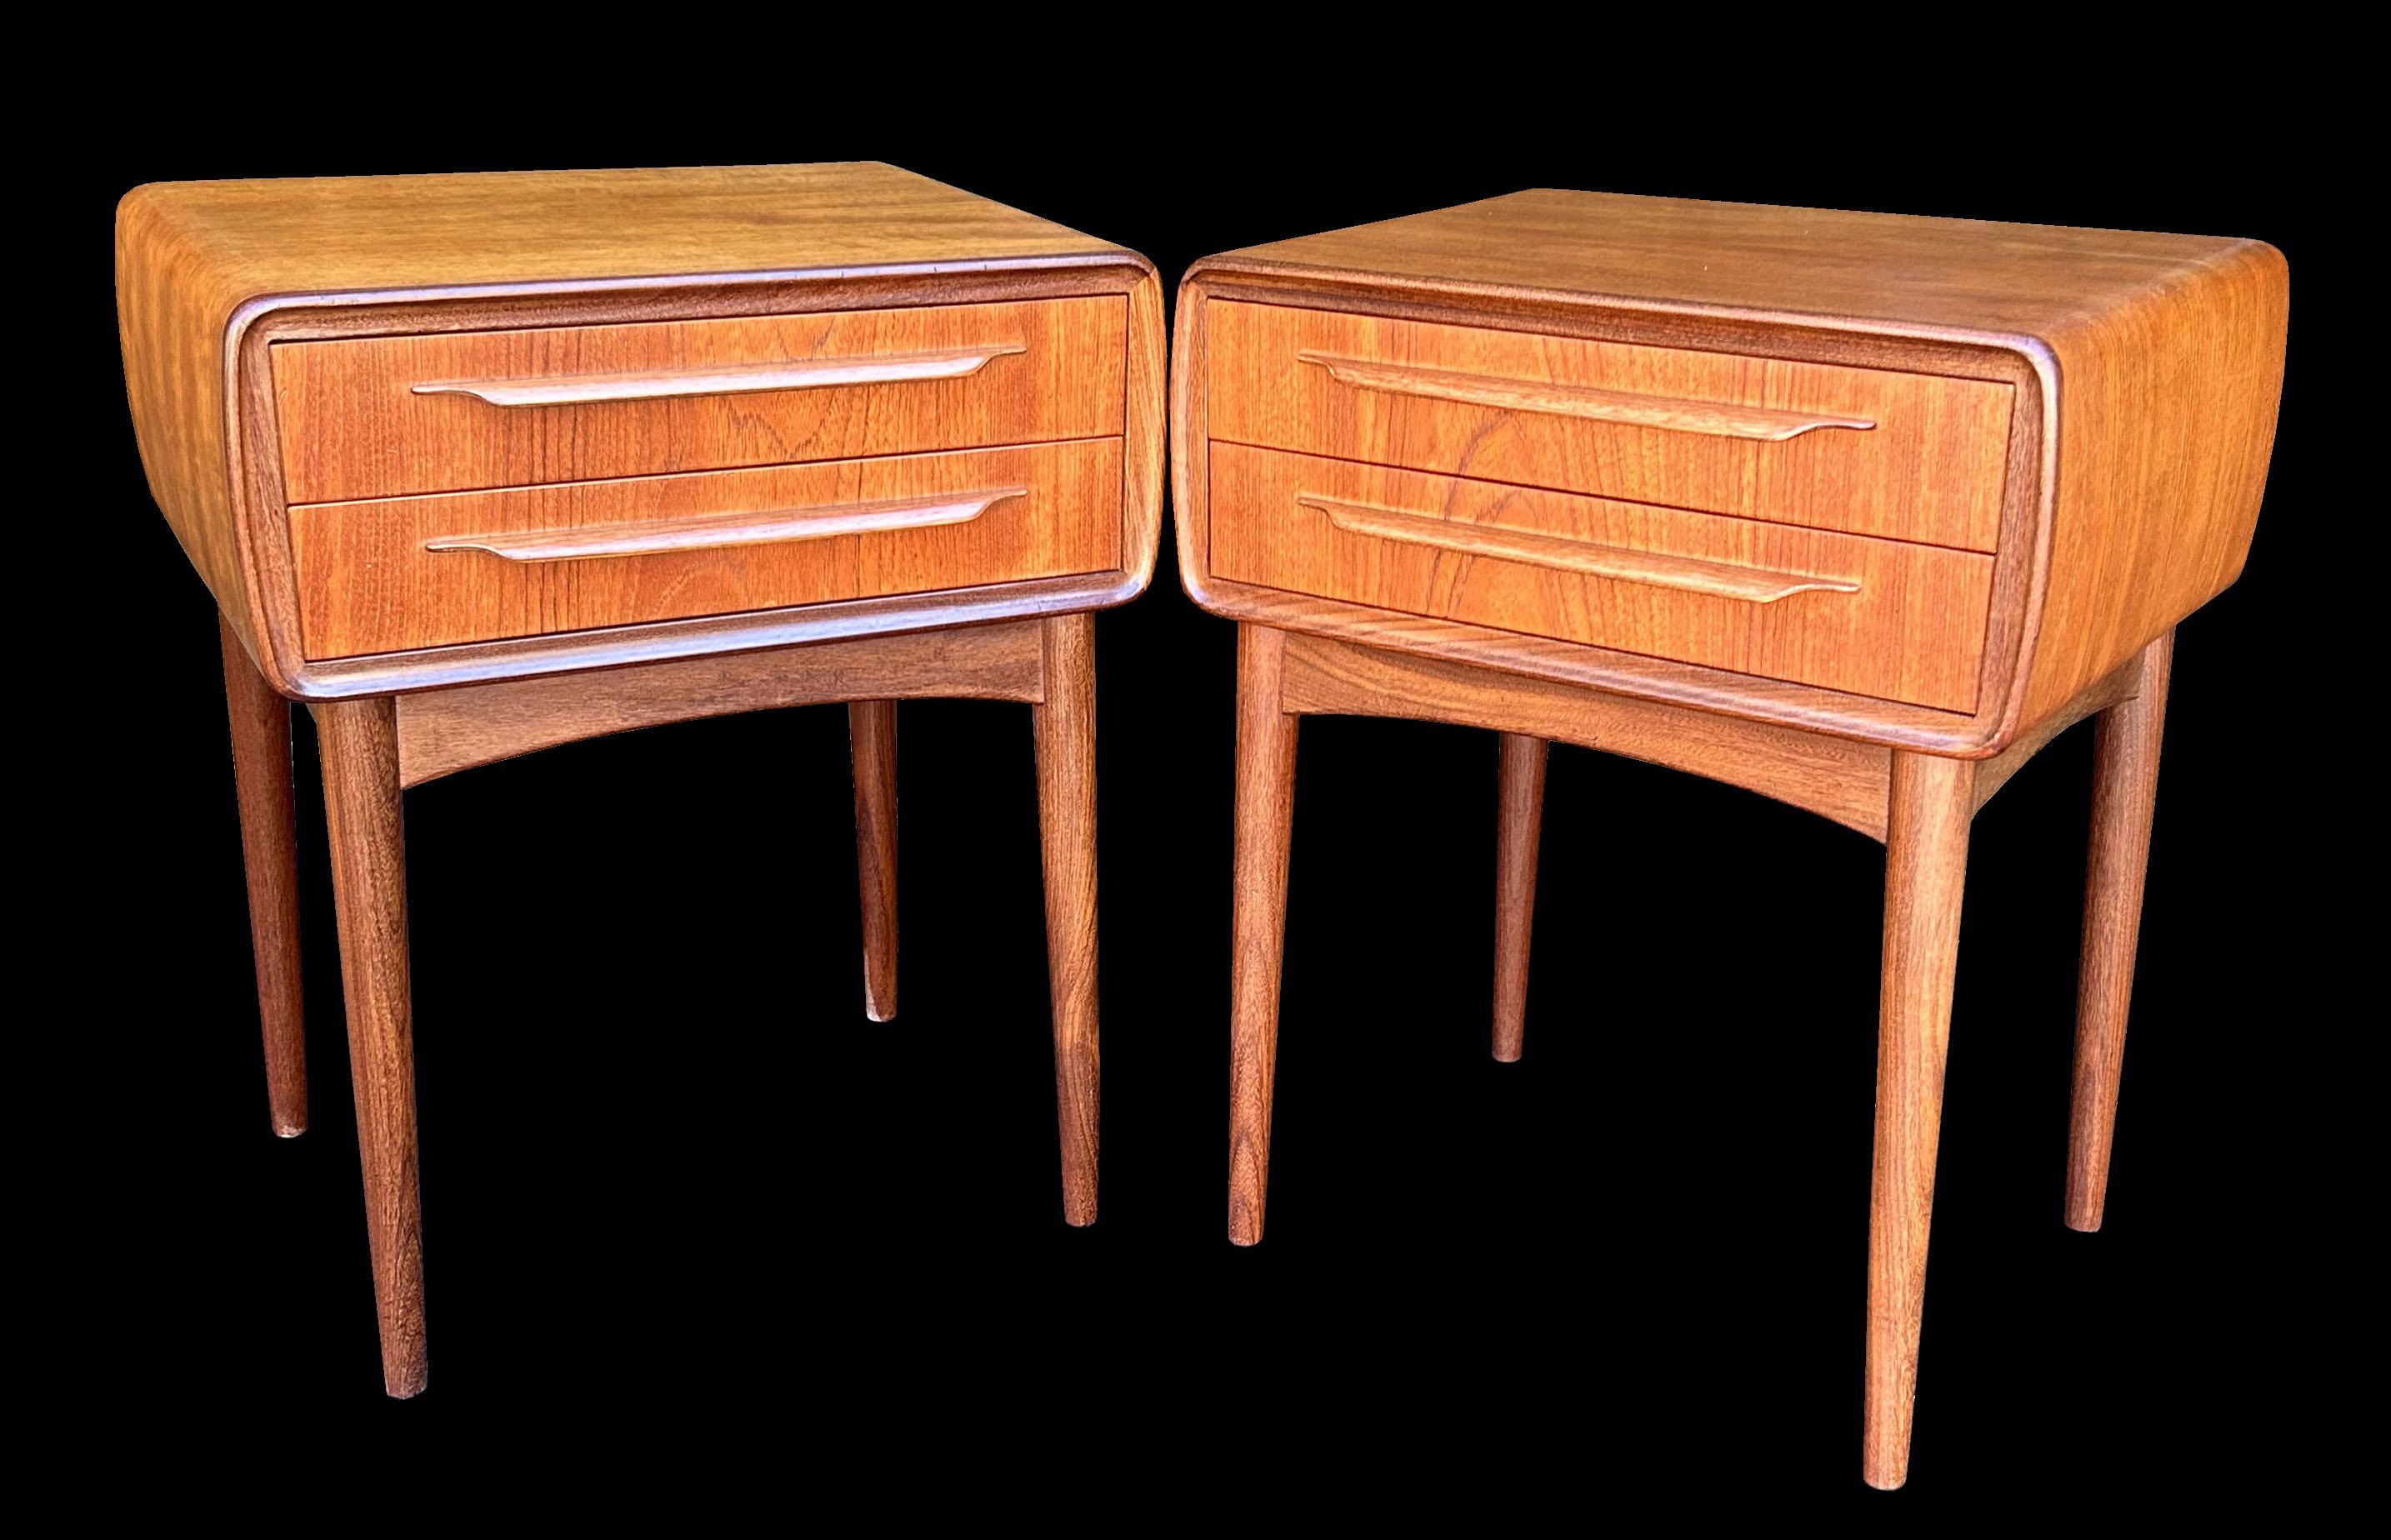 20th Century Pair of Bedside Tables In Teak by Johannes Andersen for CFC Silkeborg For Sale